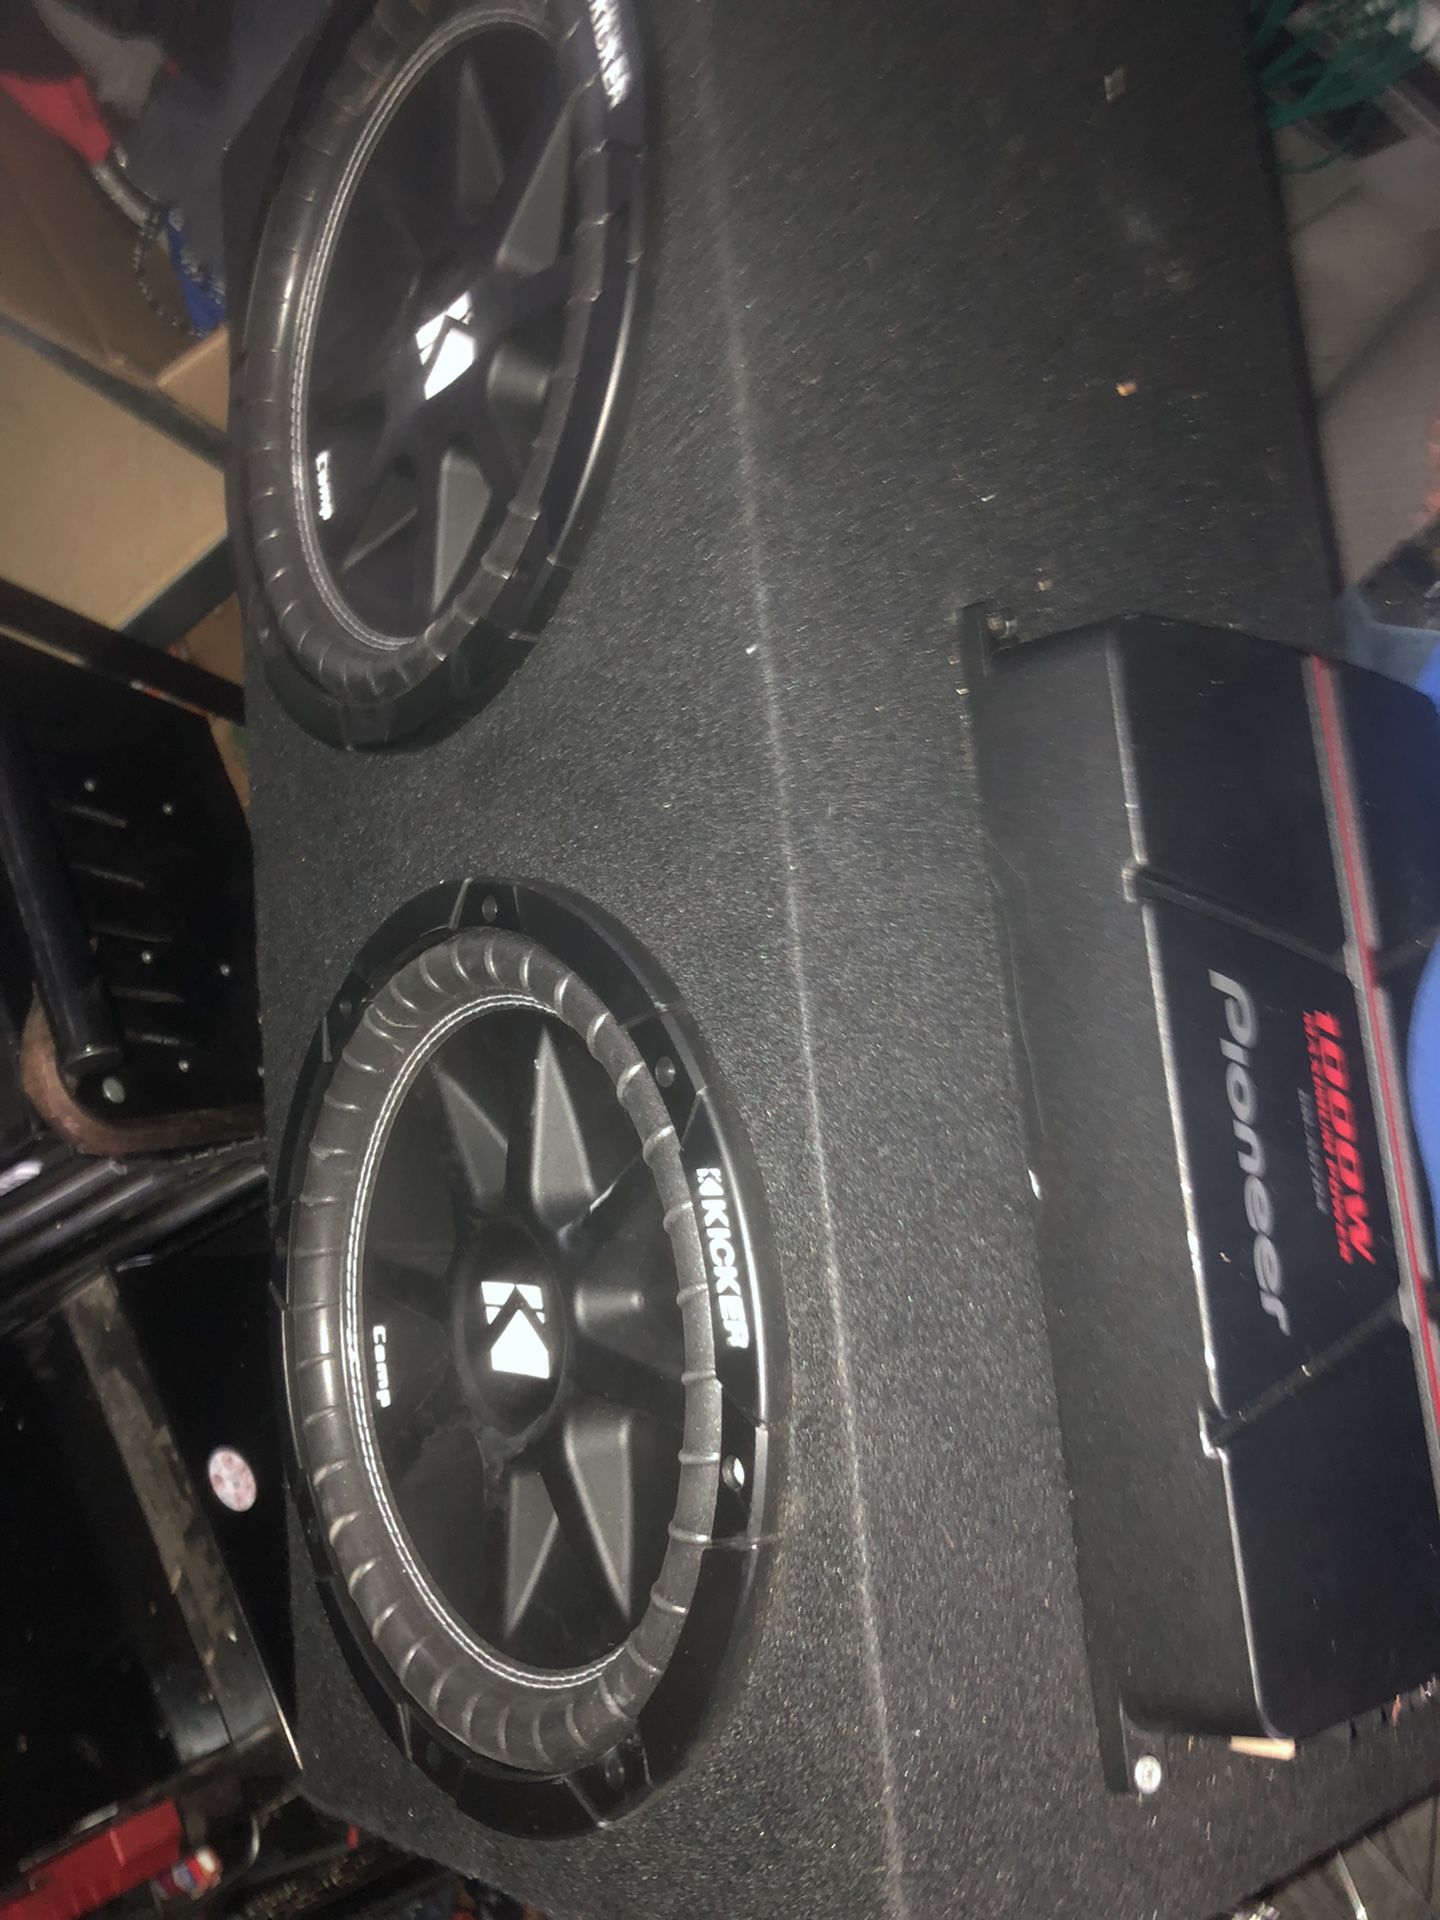 12 Inch Subwoofers And Brands Kicker Box